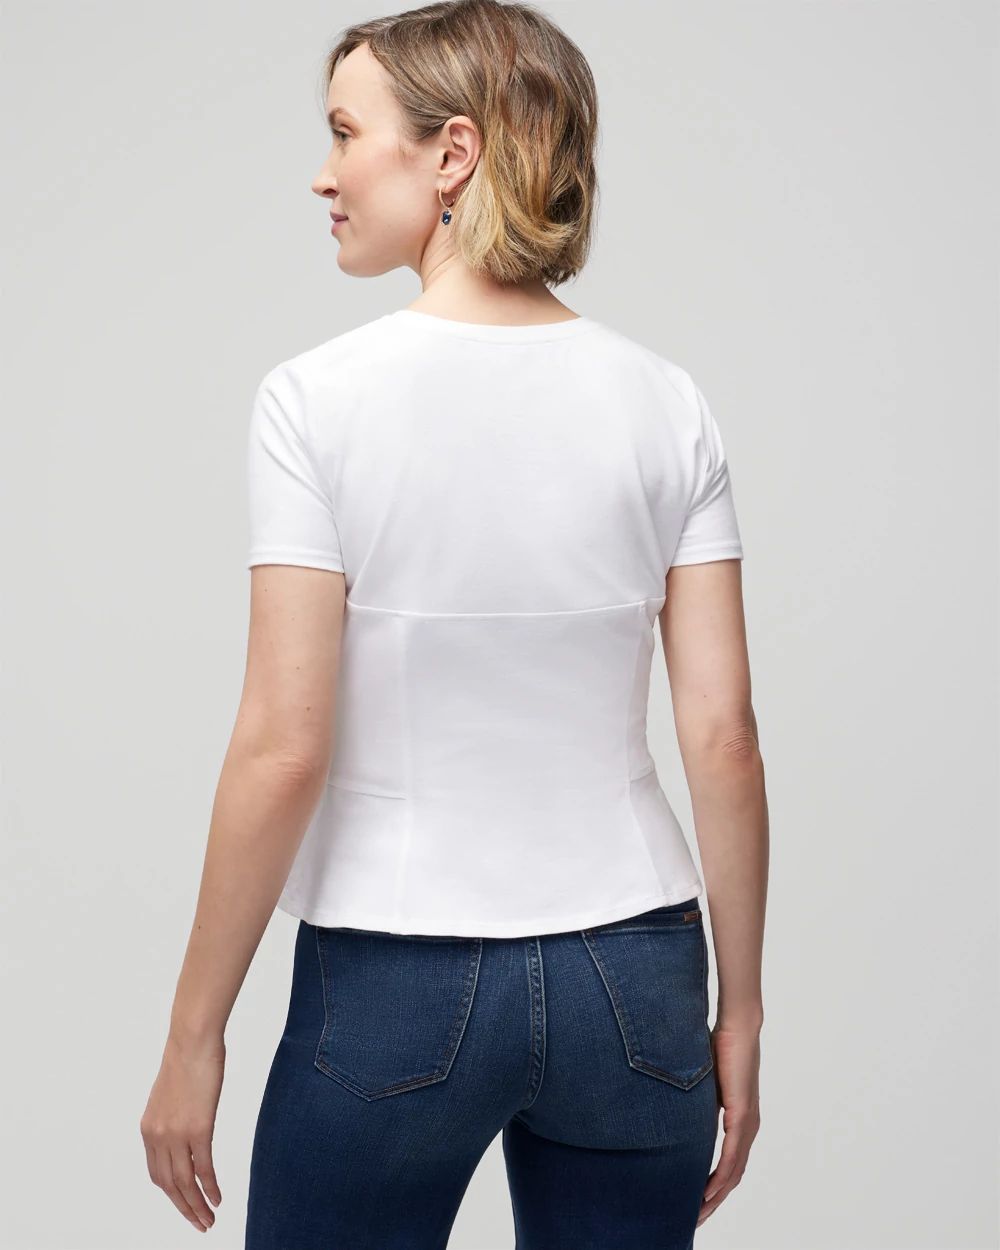 Short Sleeve Seamed Bodice Tee click to view larger image.